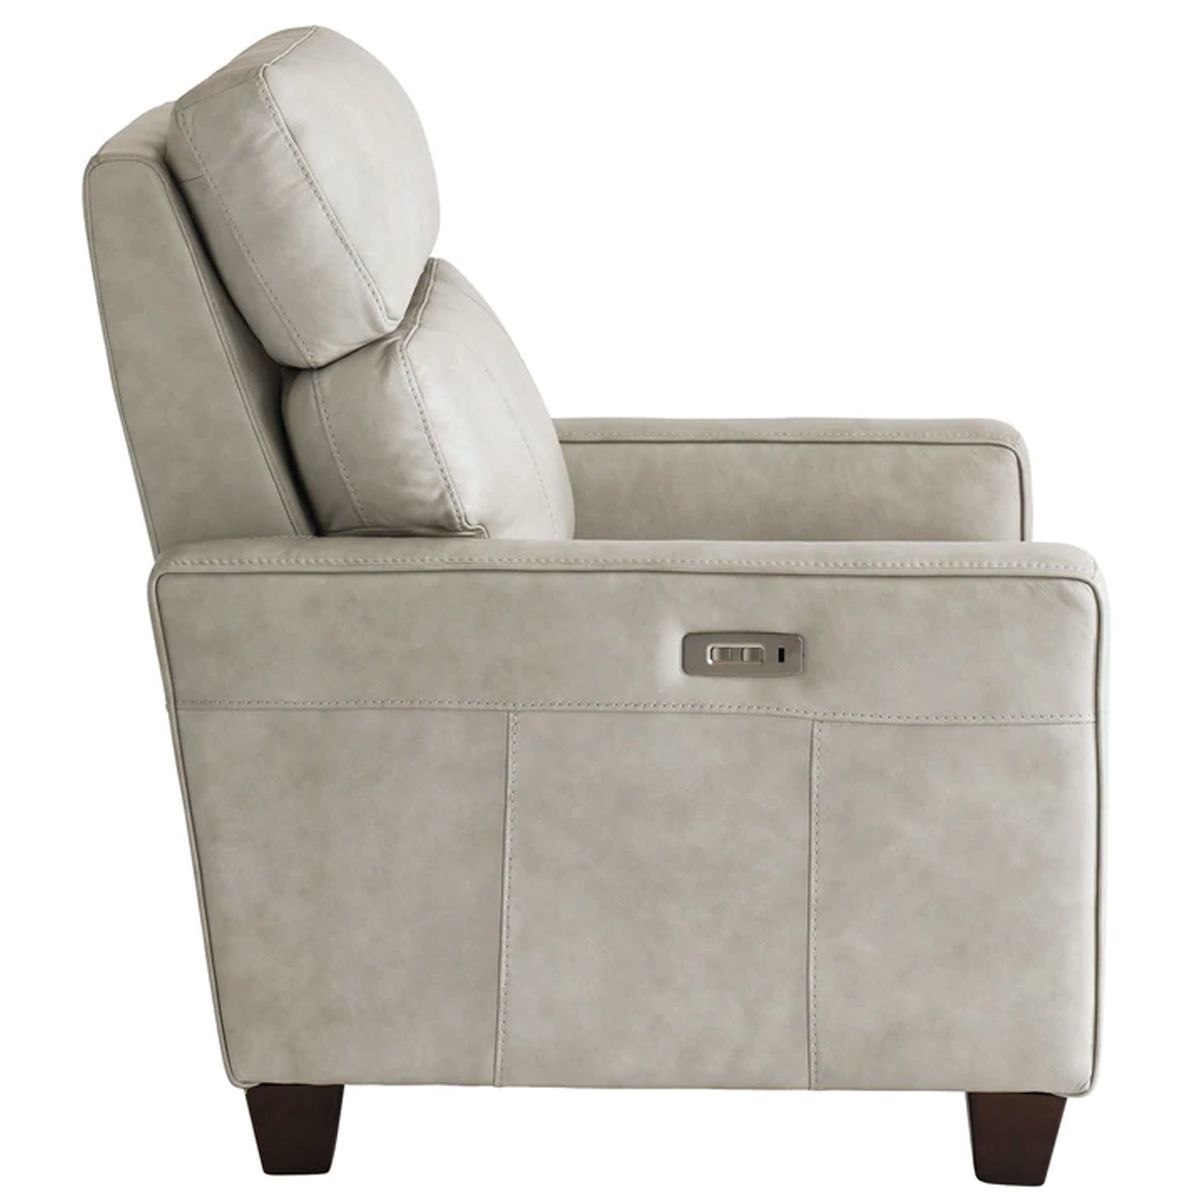 Picture of TOMPKINS ARCTIC RECLINER WITH POWER HEADREST